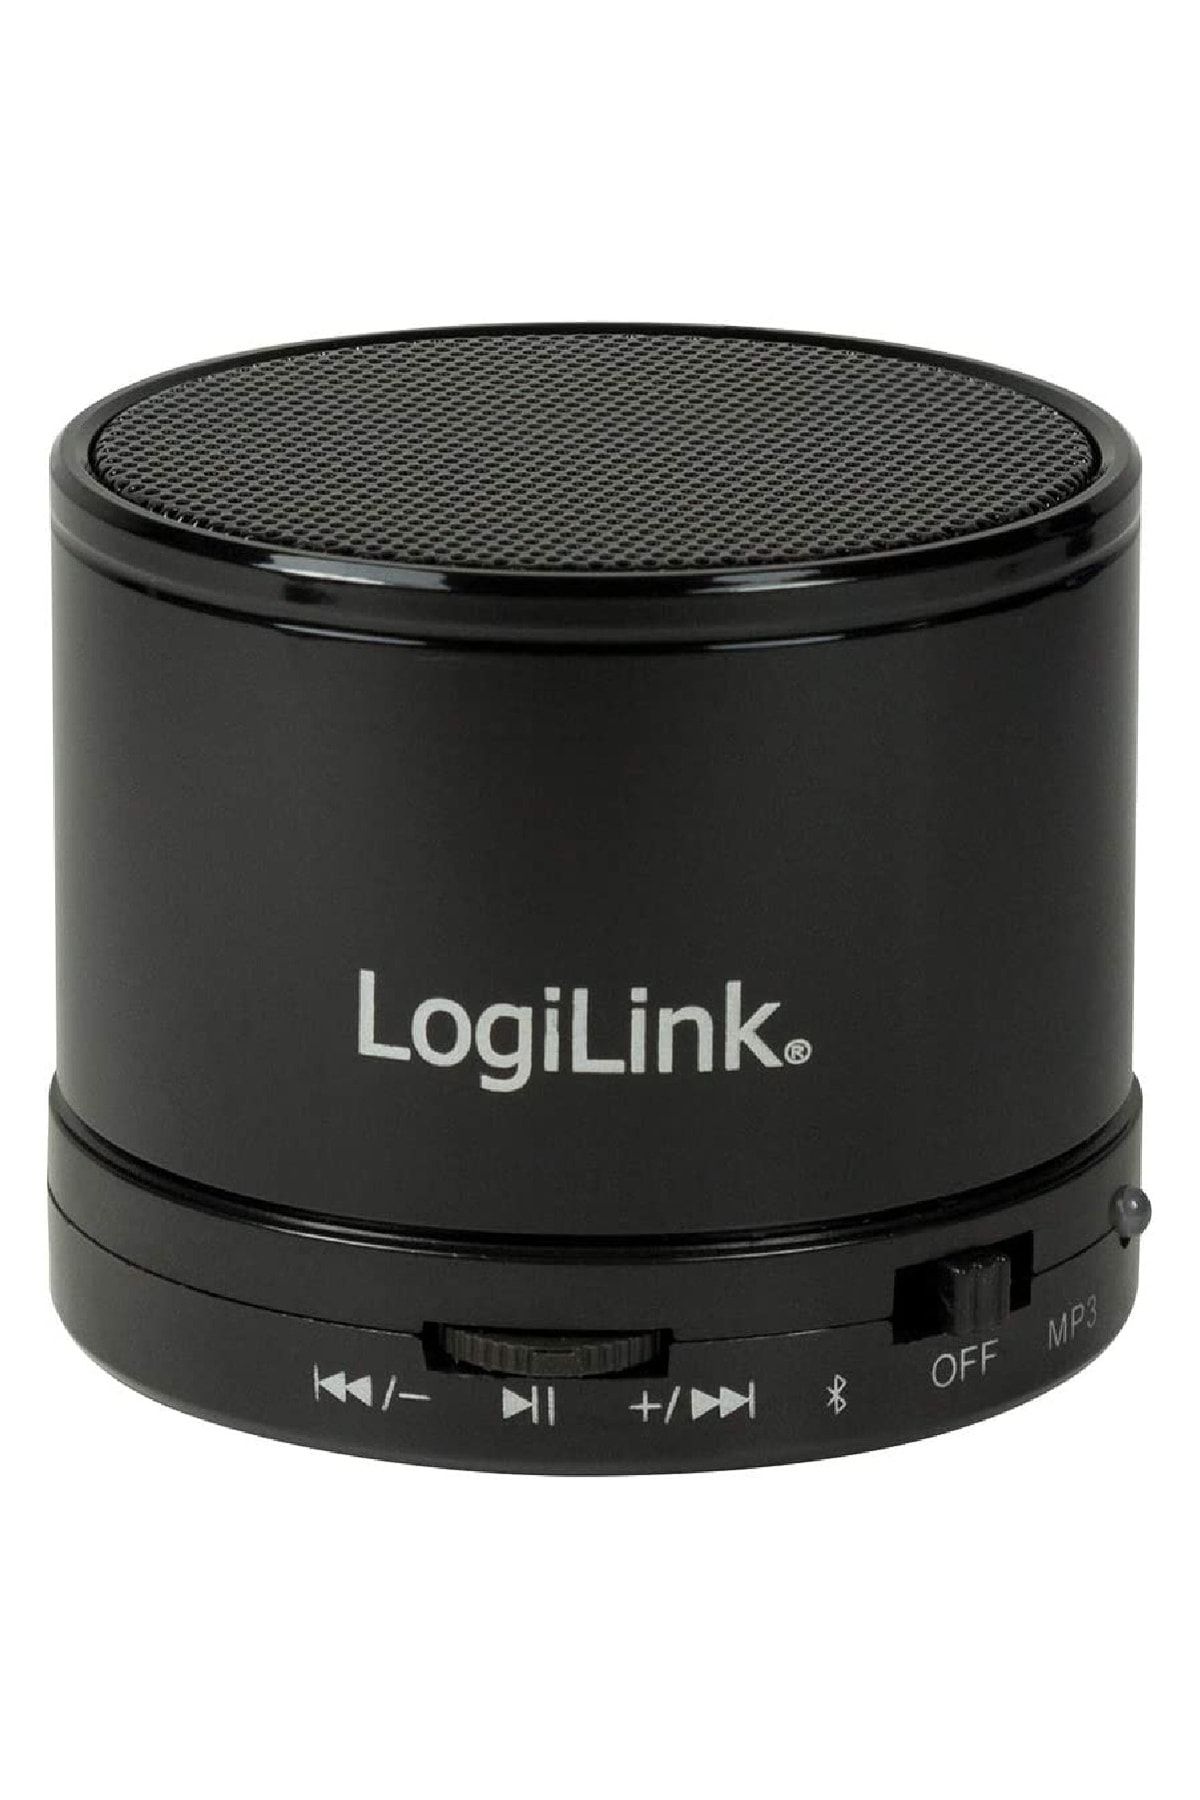 LogiLink Sp0051 Bluetooth Speaker With Mp3 Player